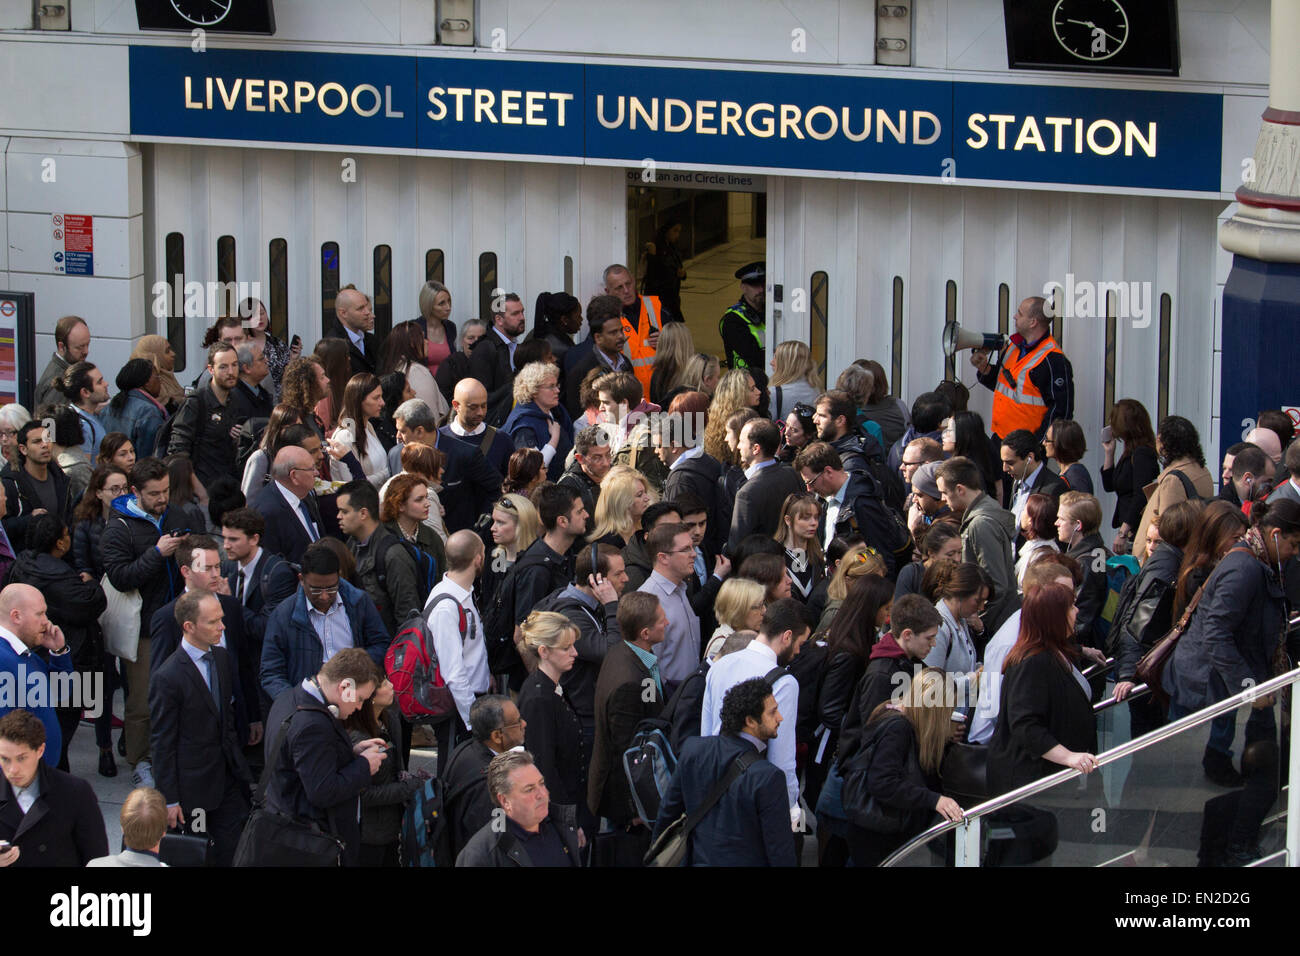 crowd control on London Underground, after Liverpool street tube station is closed during rush hour causing delays Stock Photo